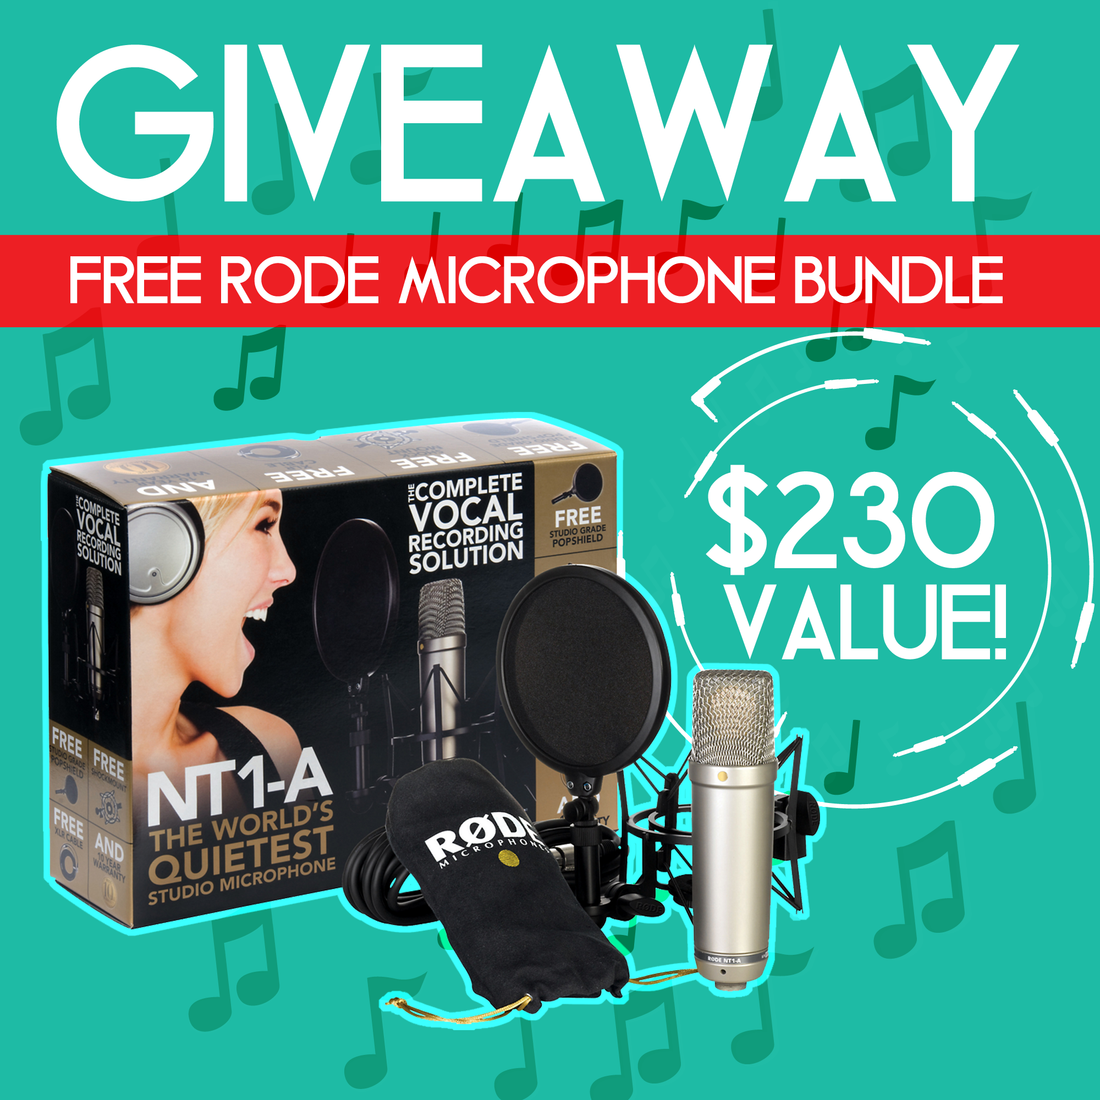 Enter to win a Rode NT1-A Microphone Bundle! [$230]